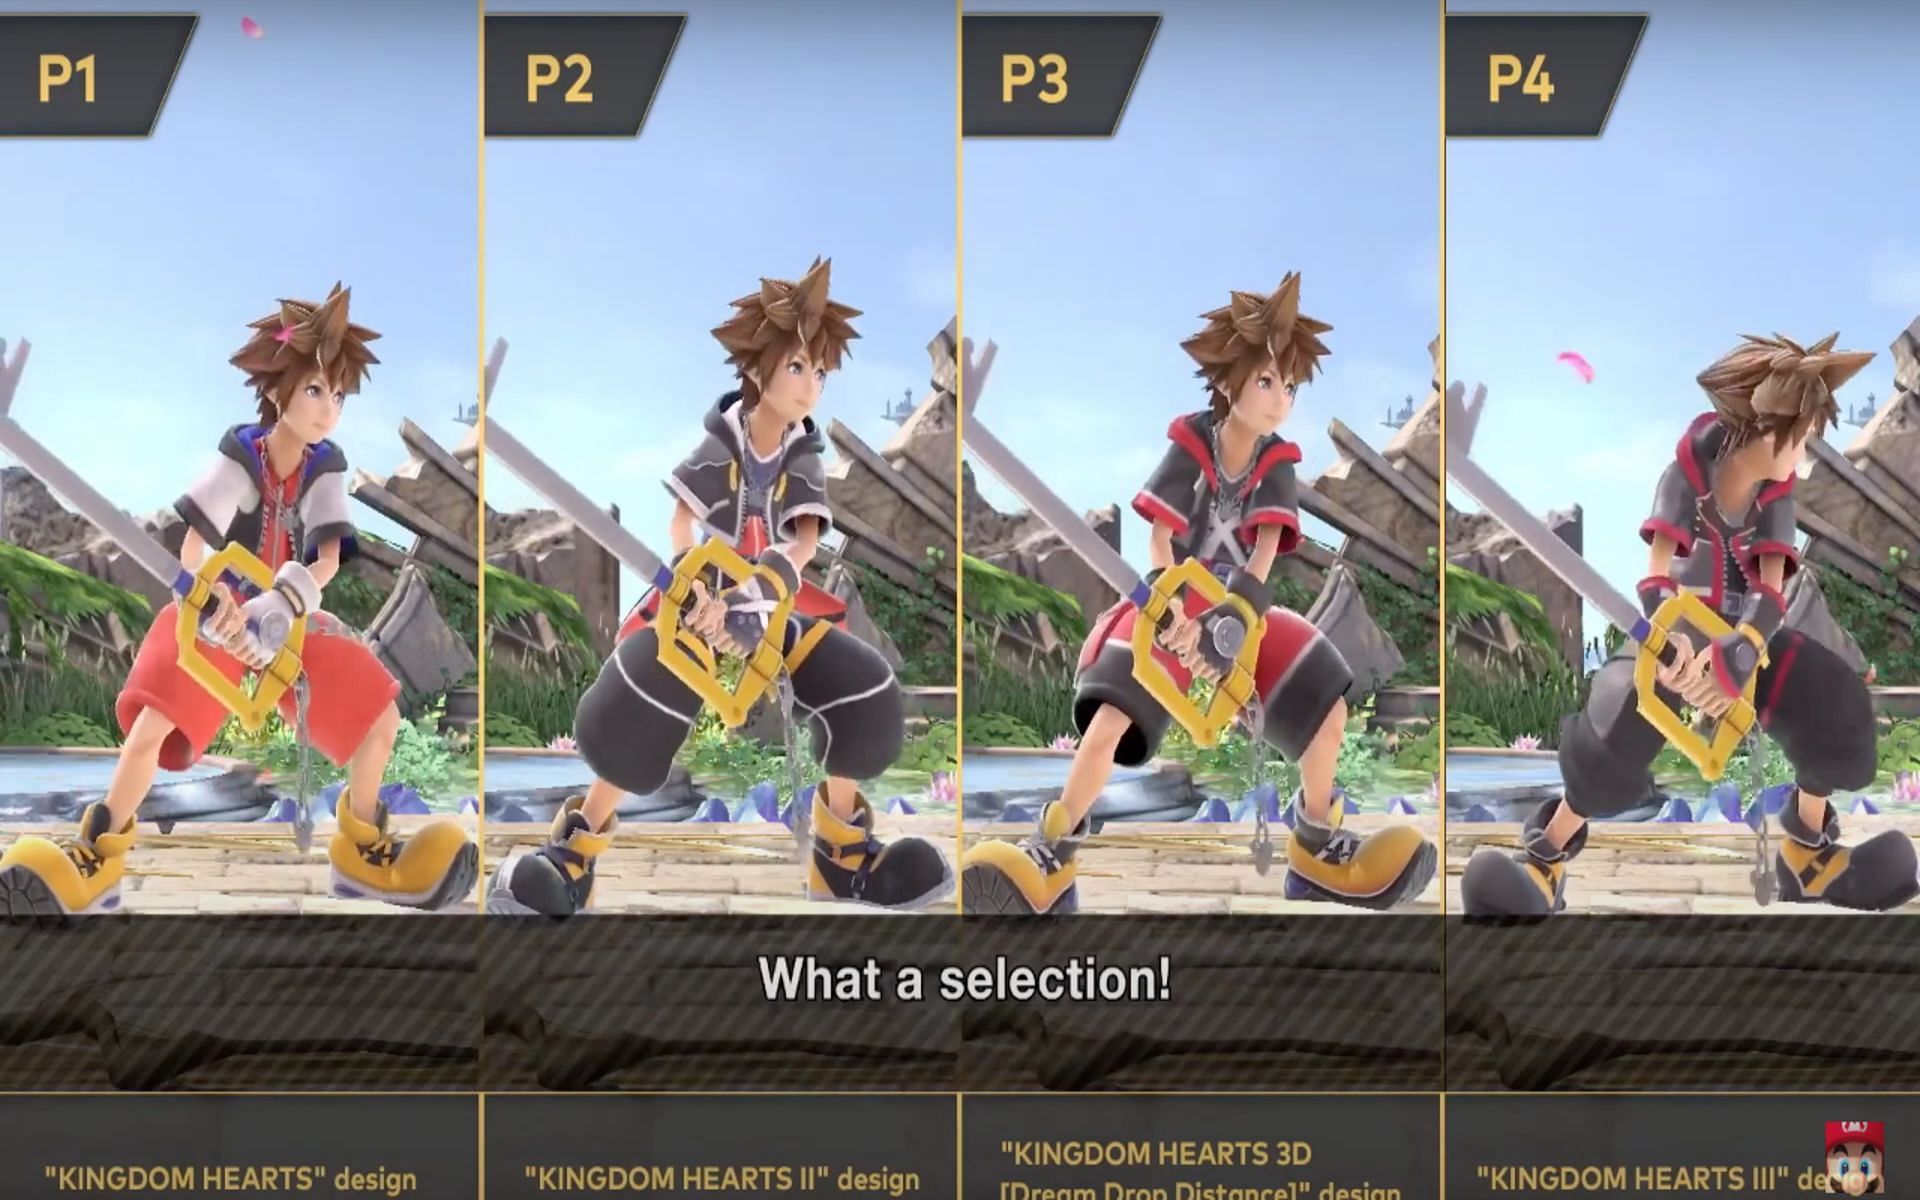 Sora has skins from multiple games in the Kingdom Hearts series (Image via Nintendo)